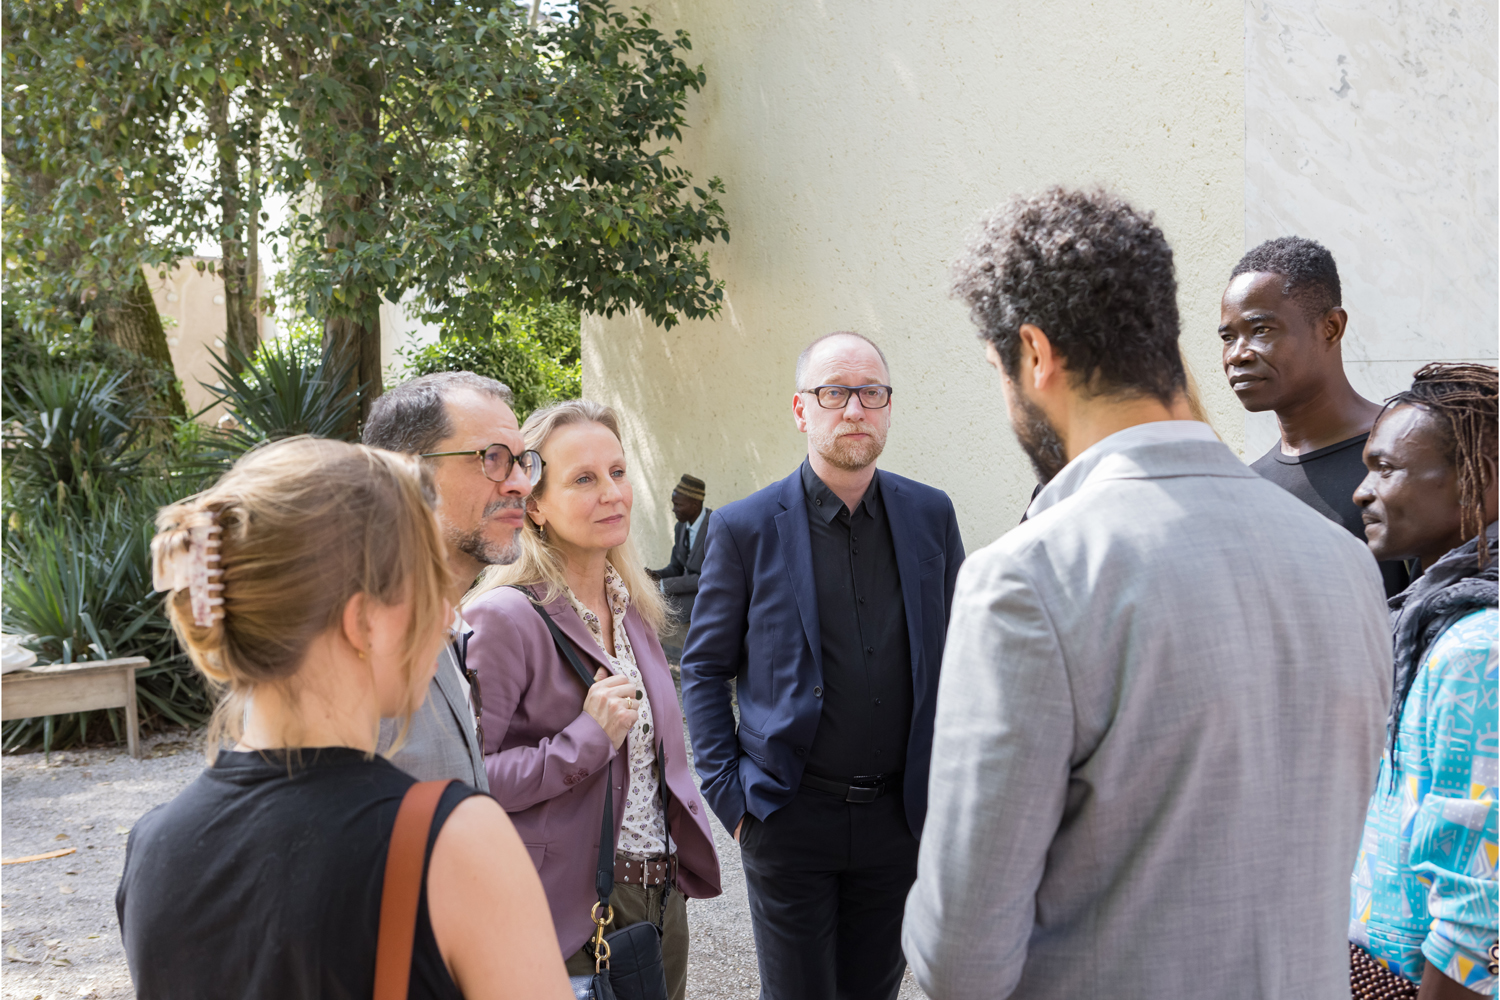 Director-General of Culture and Media Barbera Wolfensberger in conversation with curator Hicham Khalidi and CATPC artists Matthieu Kasiama and Ced'art Tamasala. Photo: Peter Tijhuis.